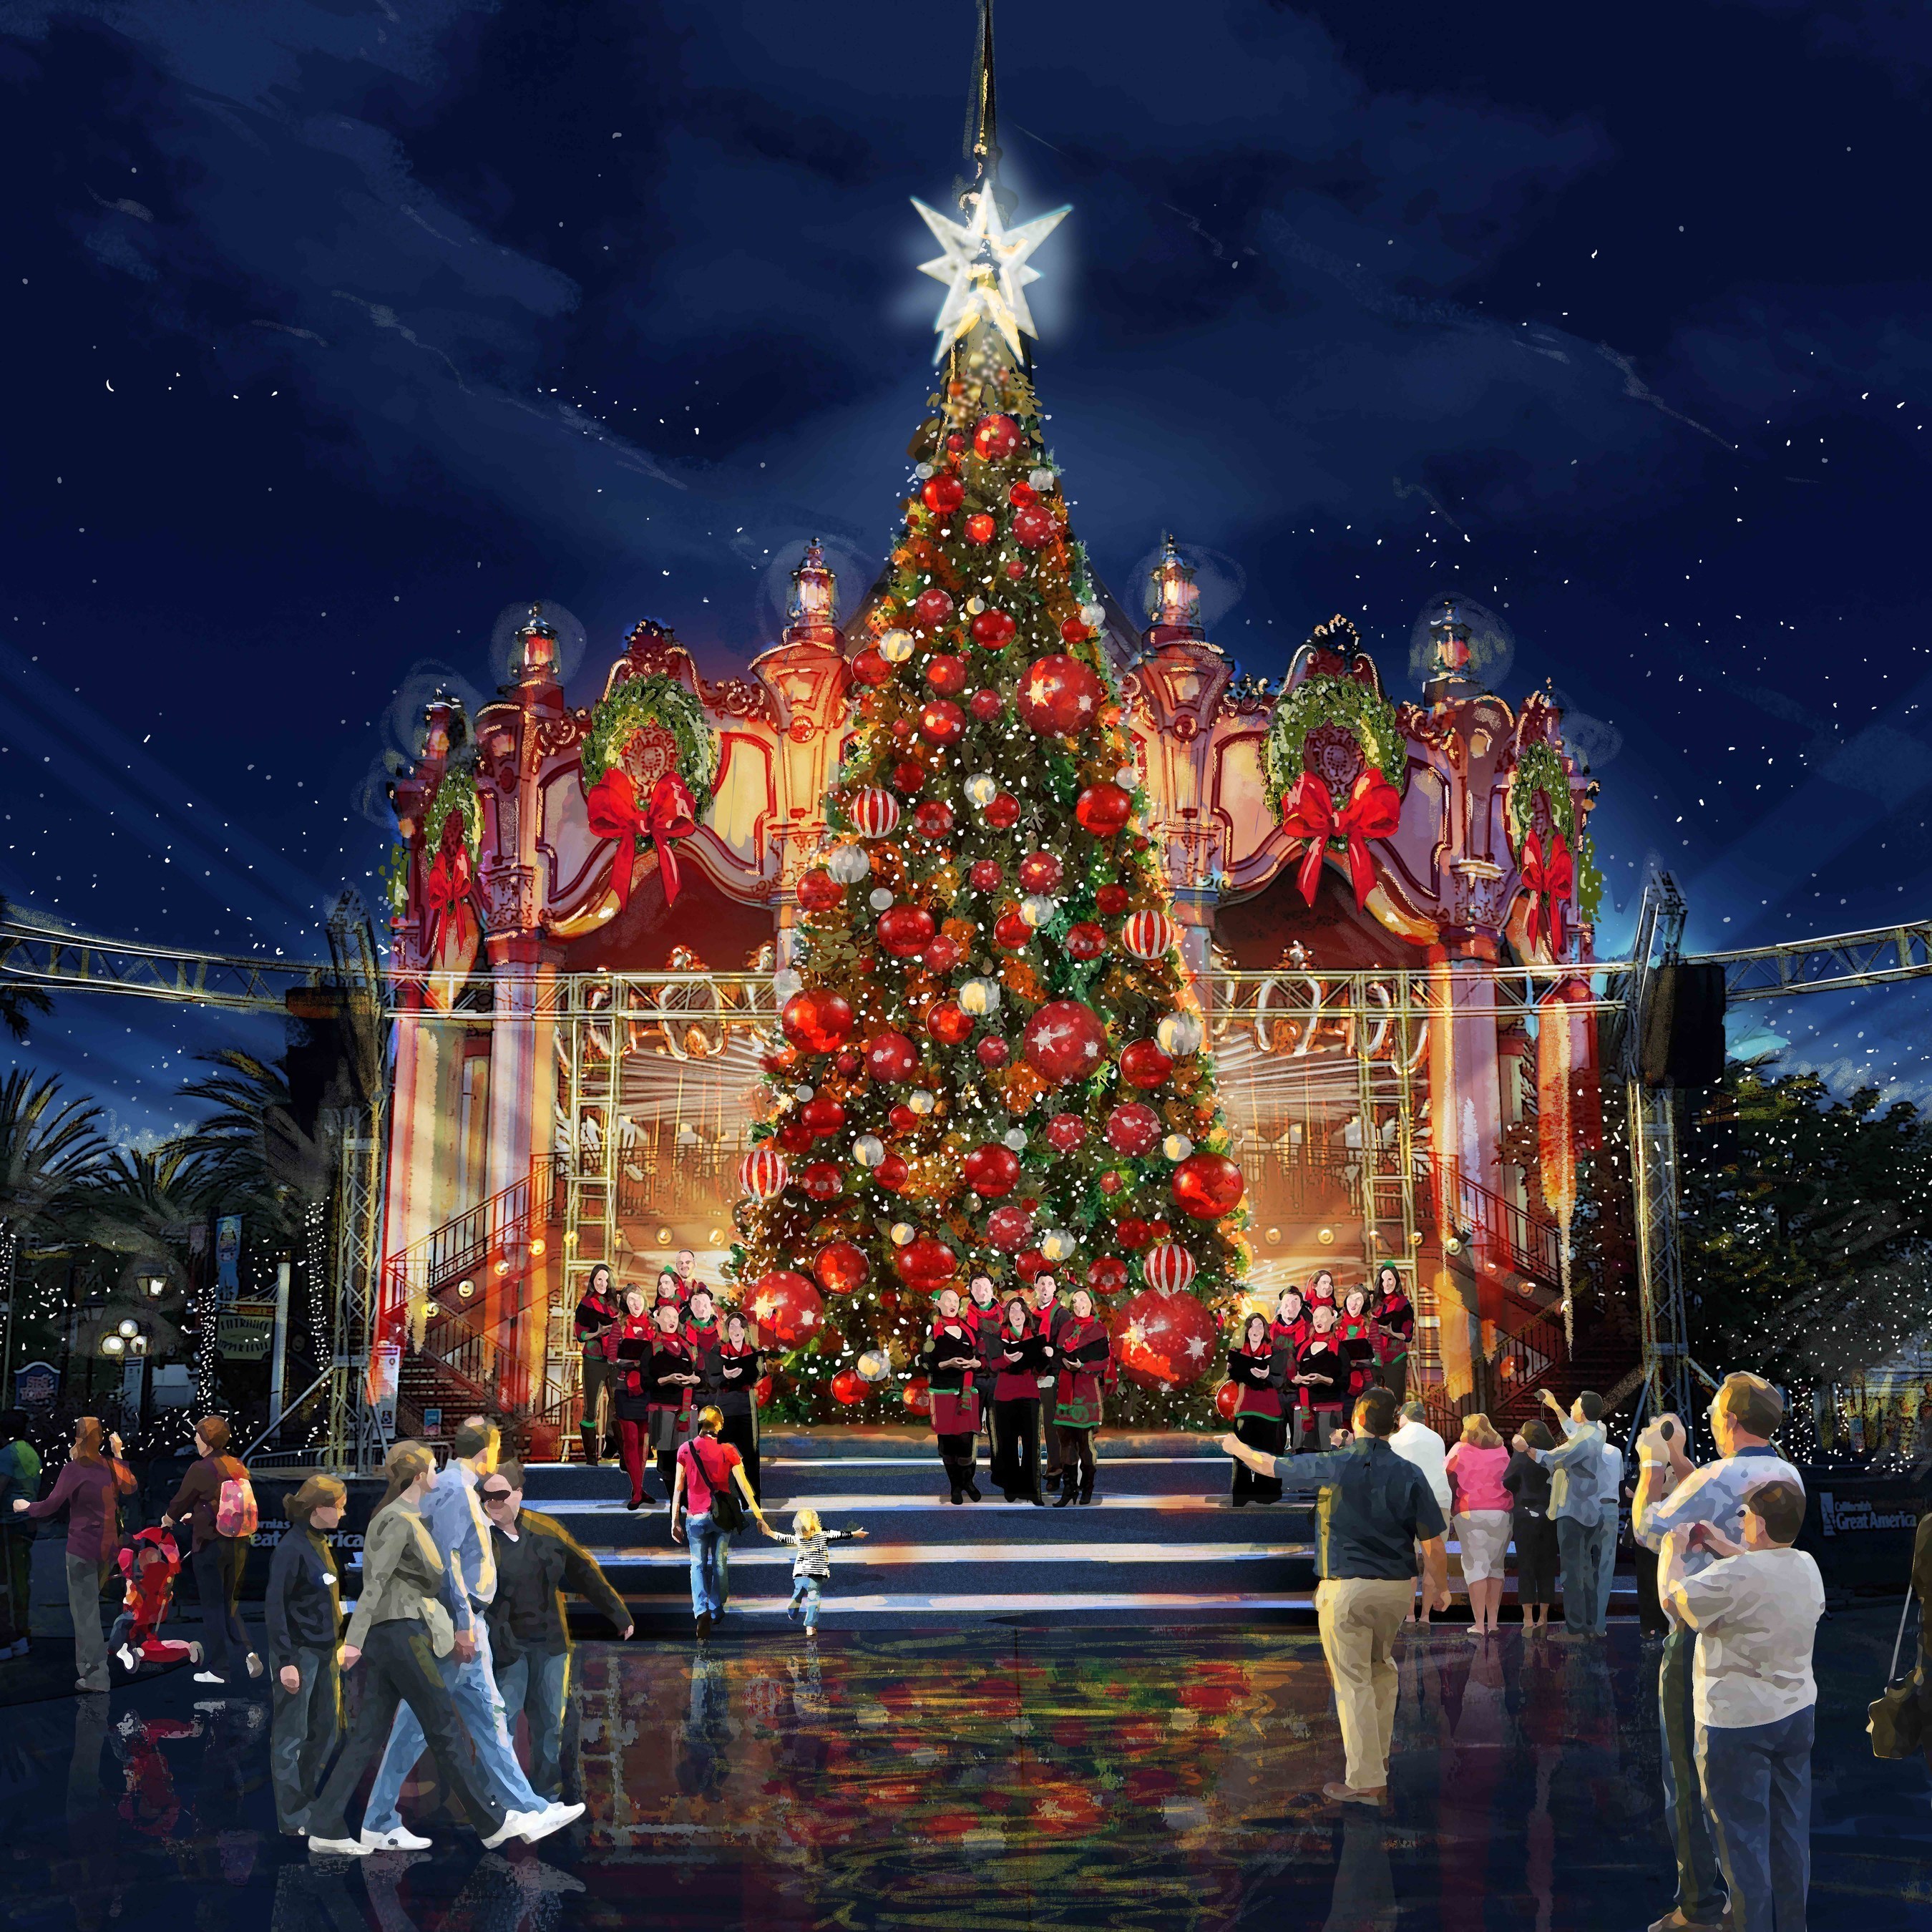 The Bay Area's newest and most immersive holiday tradition, WinterFest, will debut at California's Great America on Friday, November 25. During WinterFest, Great America will be magically transformed into a winter wonderland where guests can skate in front of the iconic Carousel Columbia, admire magnificent displays of lights and decor, view spectacular live holiday shows, experience 20 rides and attractions, see Santa's workshop and Mrs. Claus' kitchen, and enjoy scrumptious holiday fare at numerous dining locations.